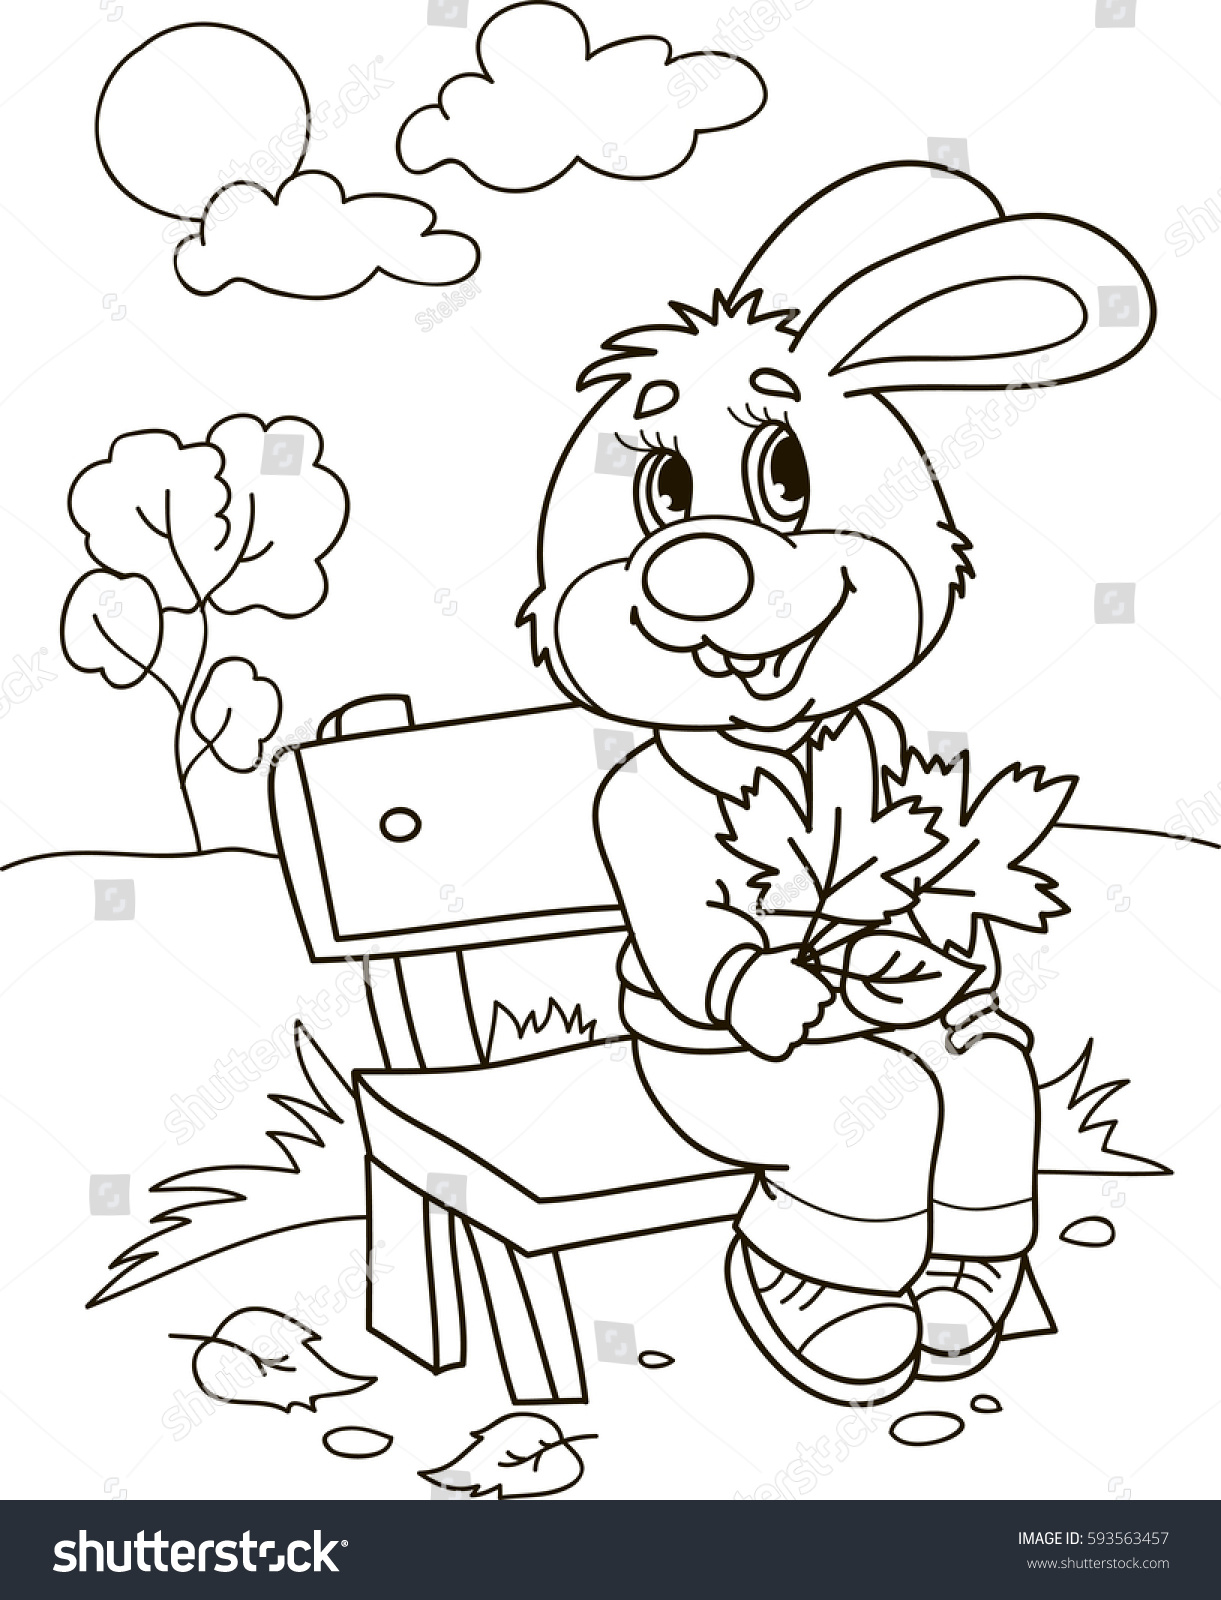 Coloring Page Outline Cartoon Rabbit On Stock Vector 593563457